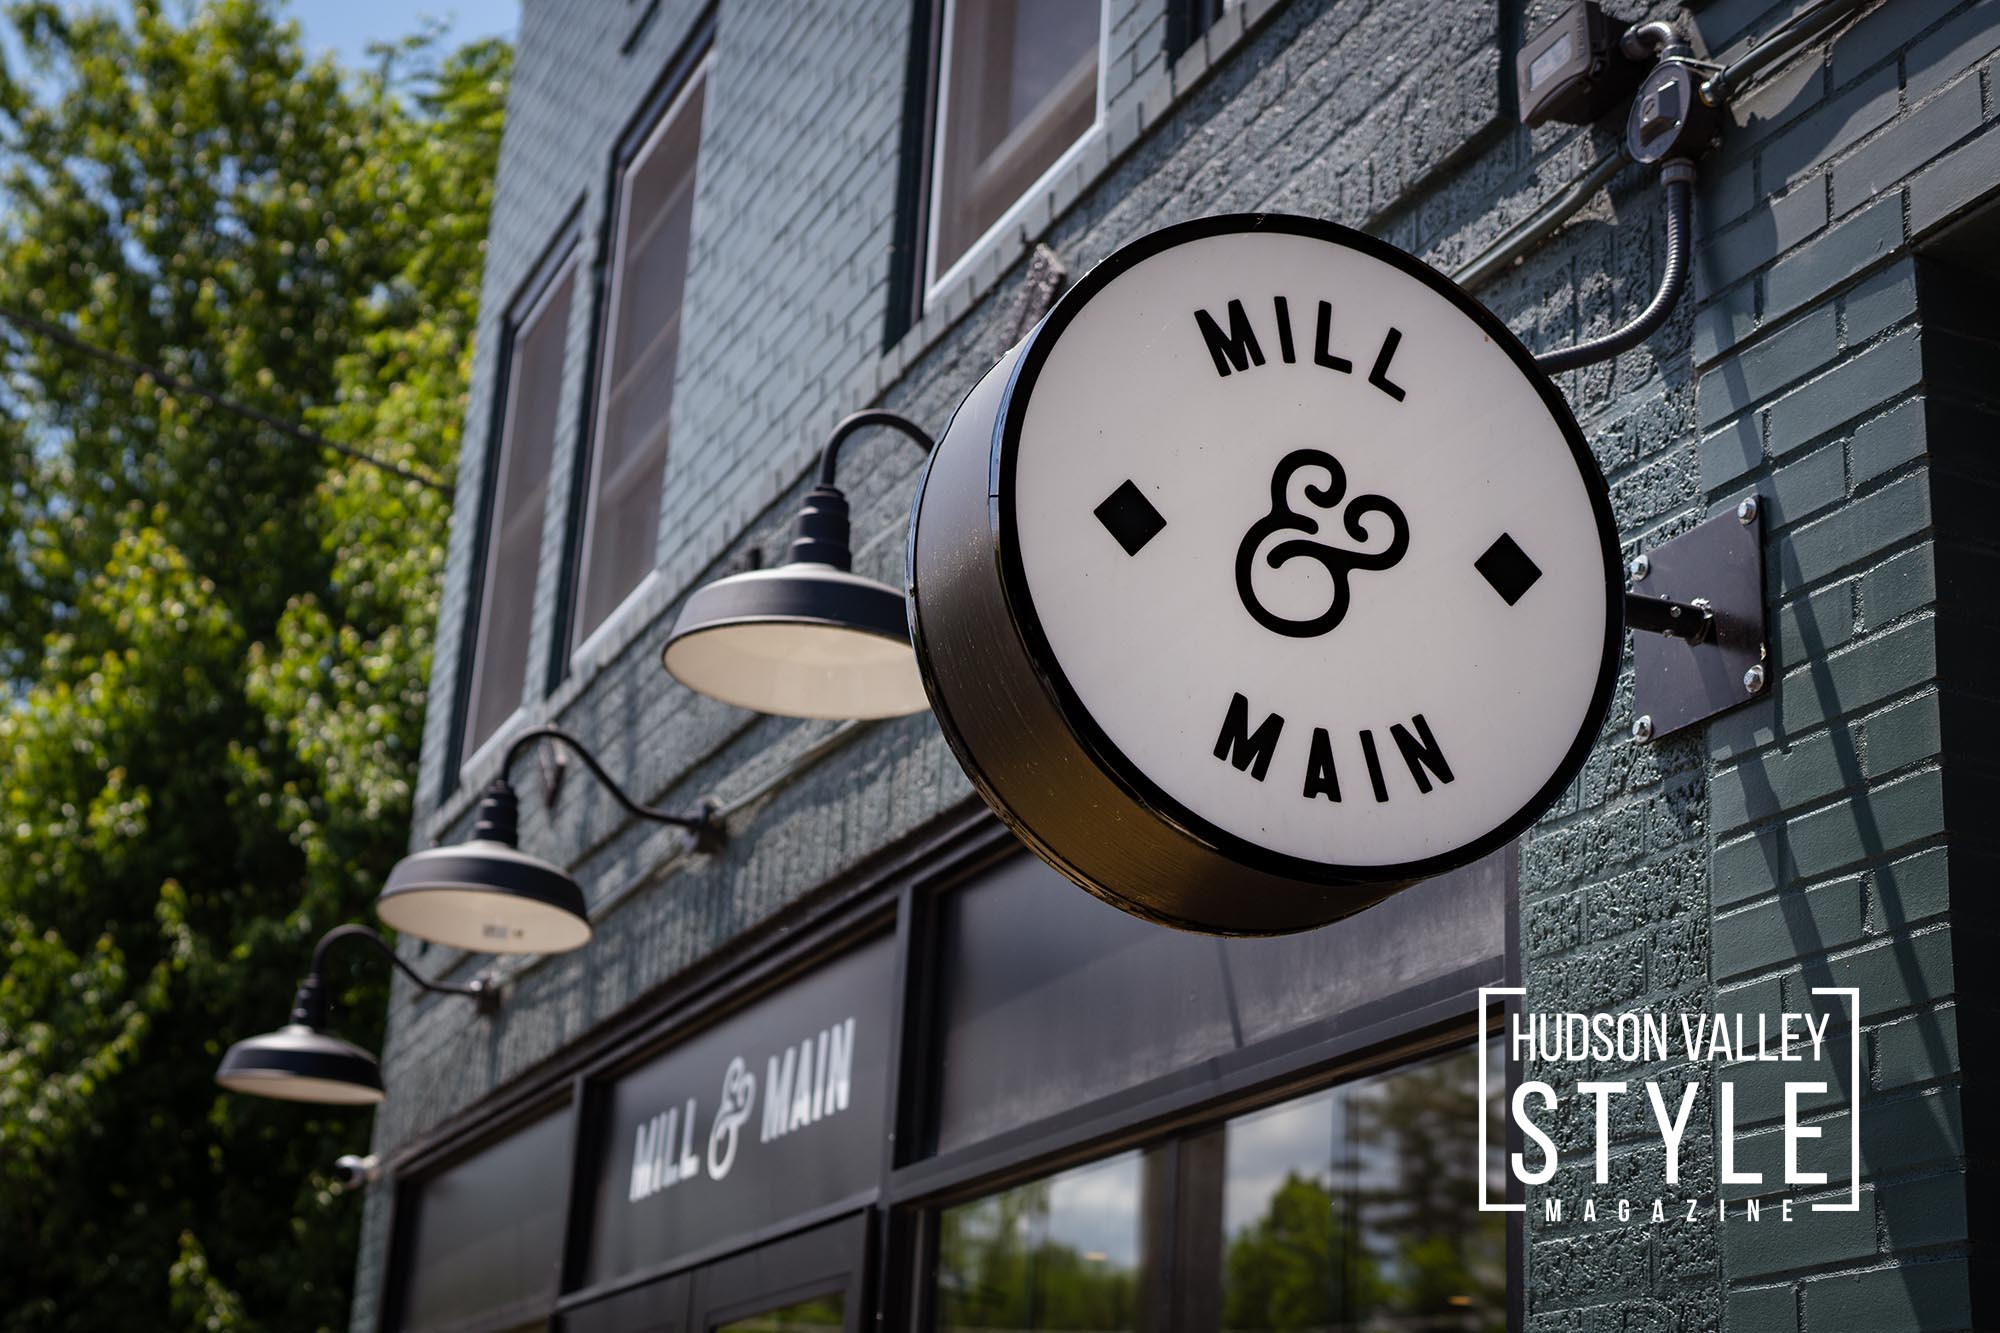 Mill & Main: A Brunch to Remember in Kerhonkson, NY – Restaurant Reviews with Maxwell Alexander – Presented by Alluvion Media